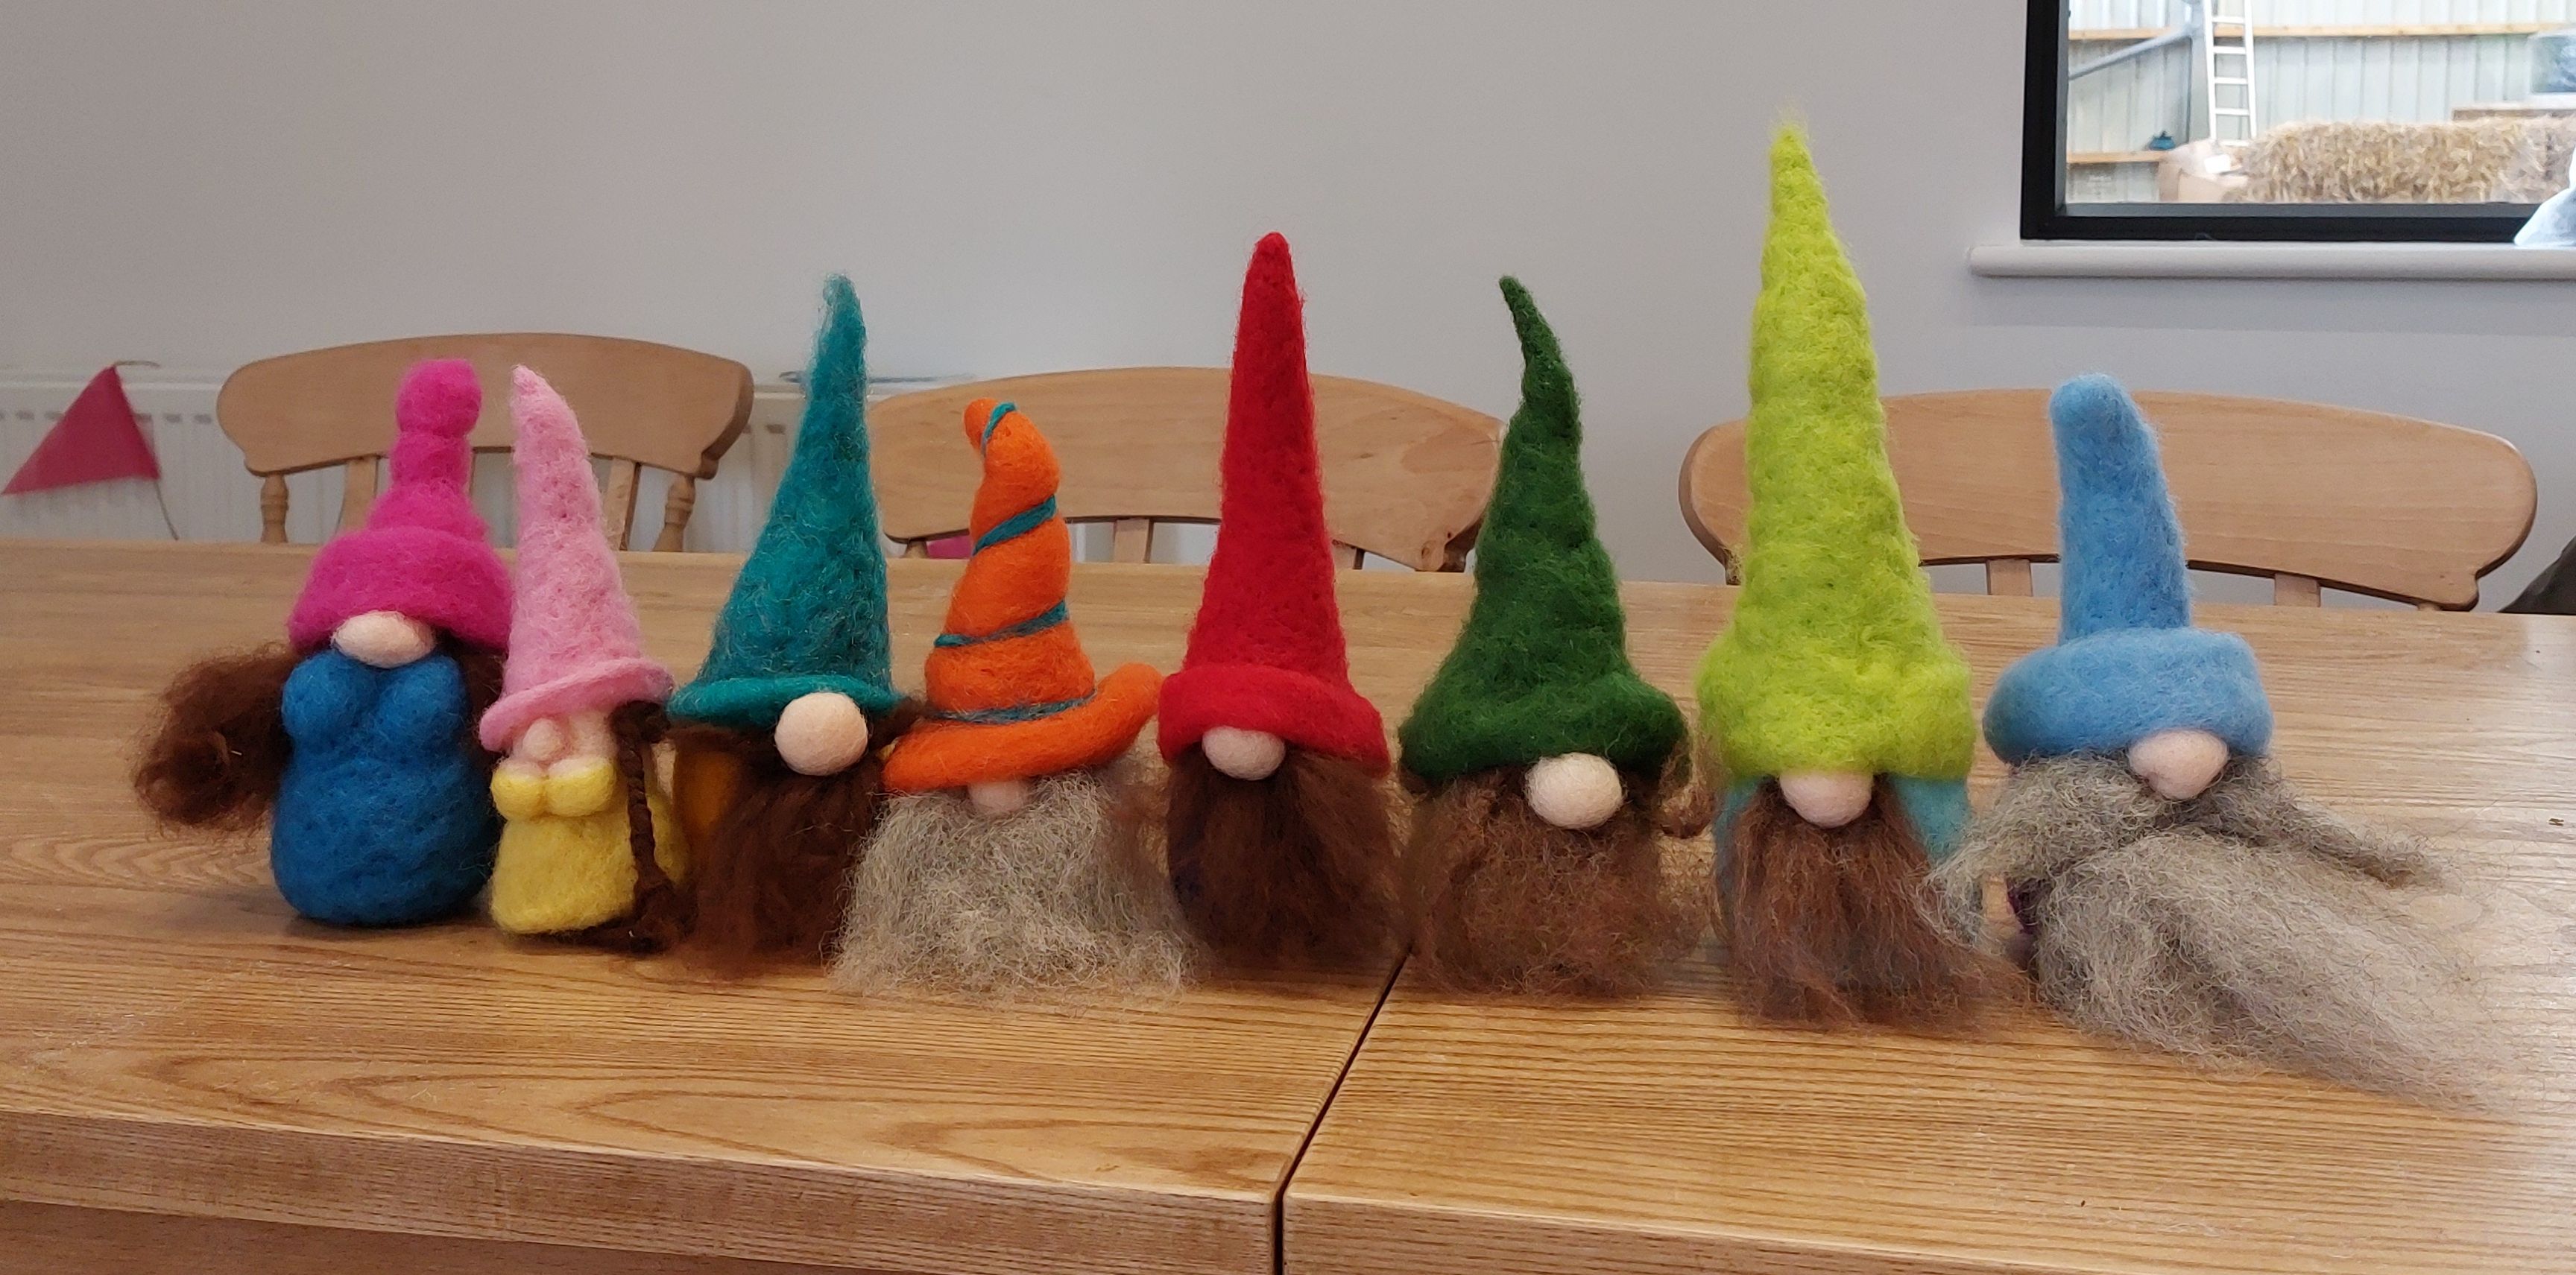 Monthly needle felt workshops available to book now!